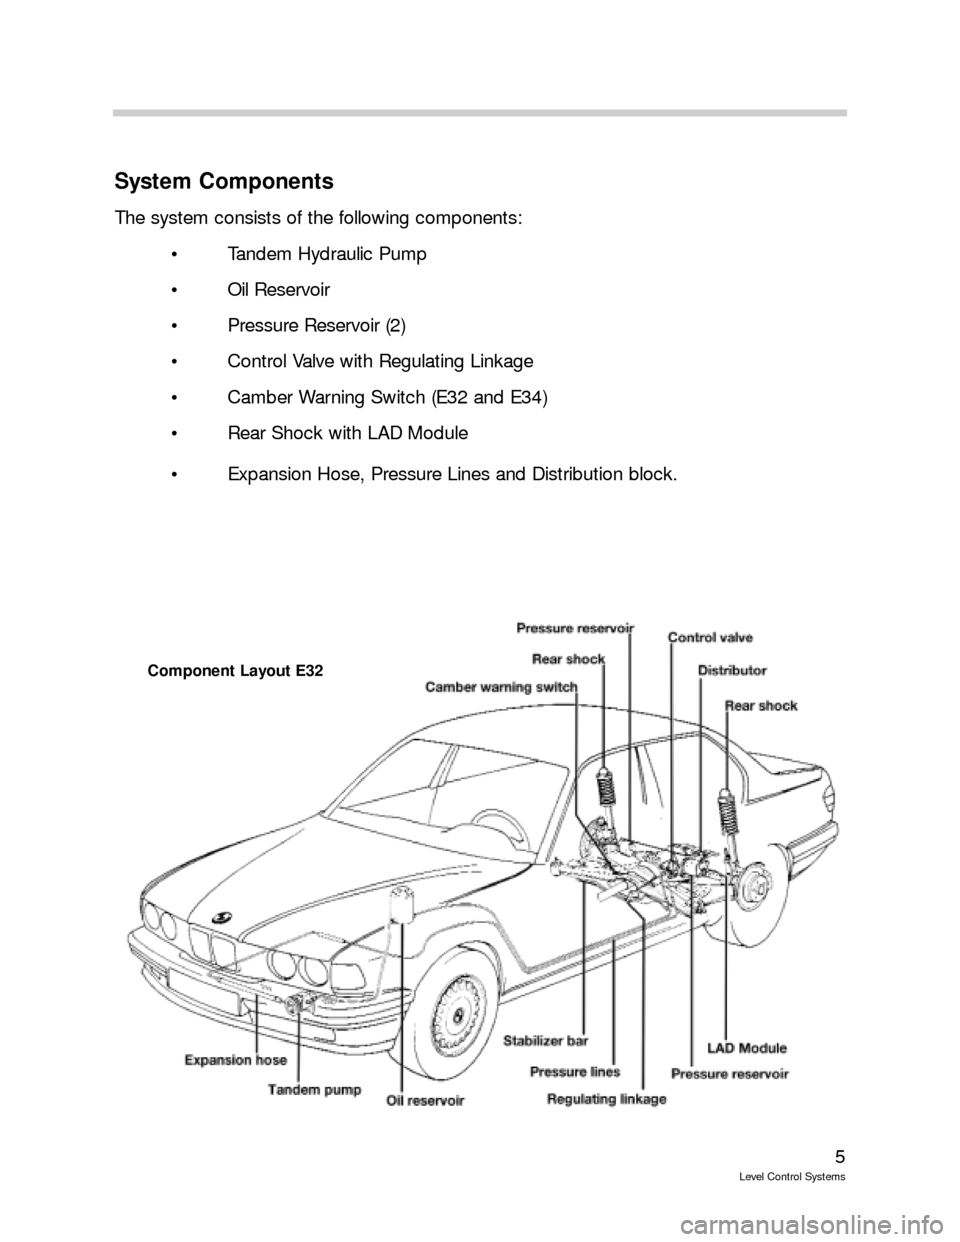 BMW 750IL 1992 E32 Level Control System Manual 5
Level Control Systems
System Components
The system consists of the following components:
 Tandem Hydraulic Pump
 Oil Reservoir
 Pressure Reservoir (2)
 Control Valve with Regulating Linkage
 Ca